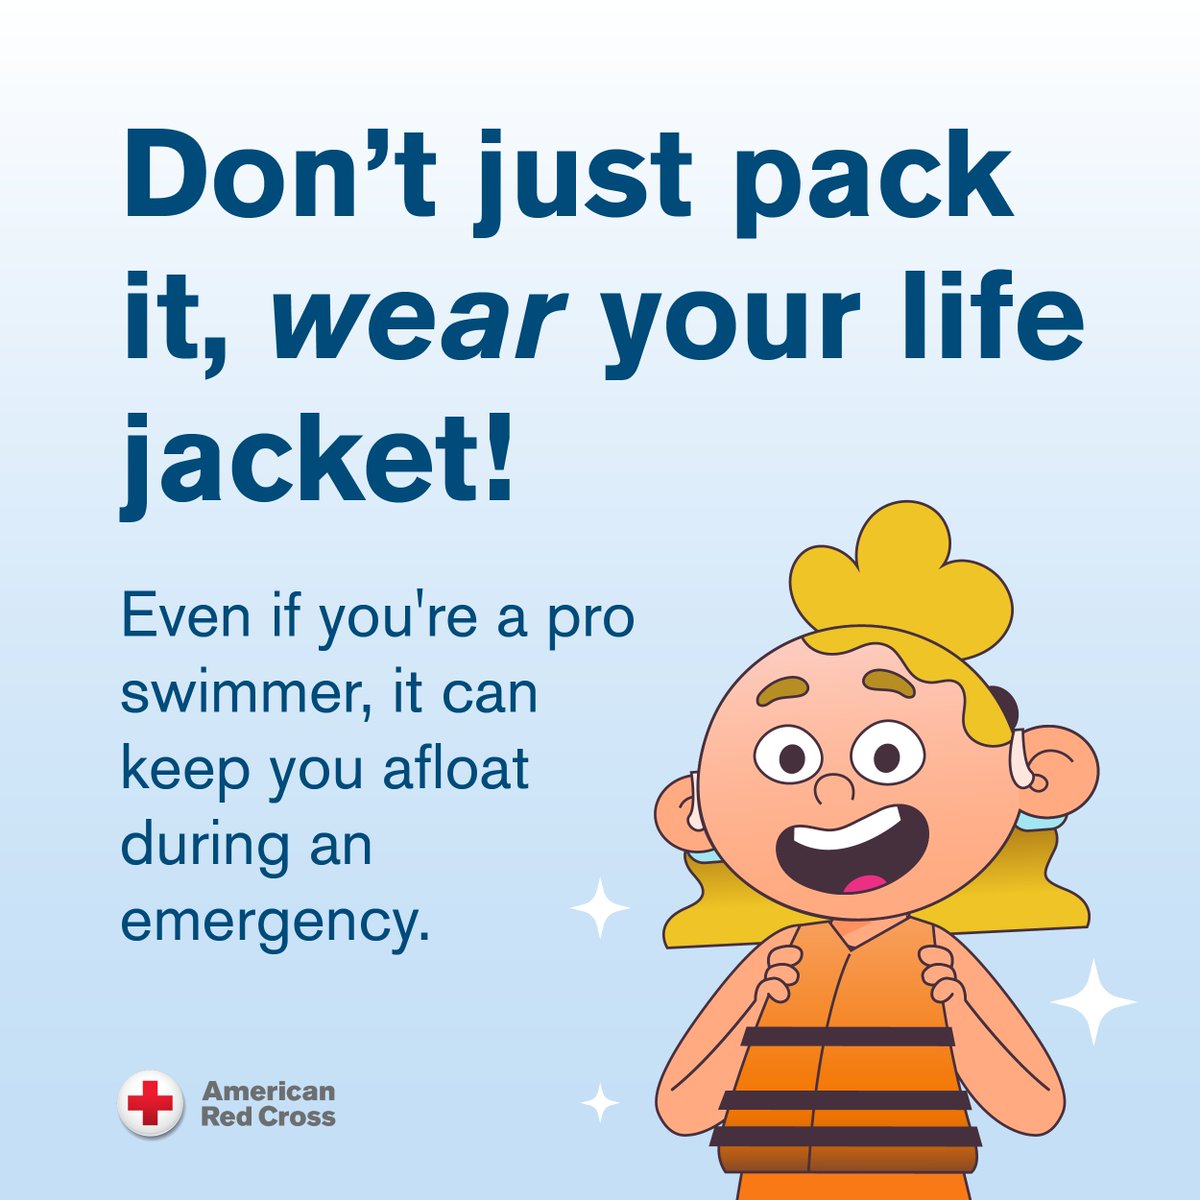 Wear your U.S. Coast Guard-approved life jackets – not just for the kids and inexperienced swimmers, but for all you water adventurers out there. Don’t just pack it, wear your life jacket. 🏊‍♂️🚤 Visit: rdcrss.org/4brc3Pu